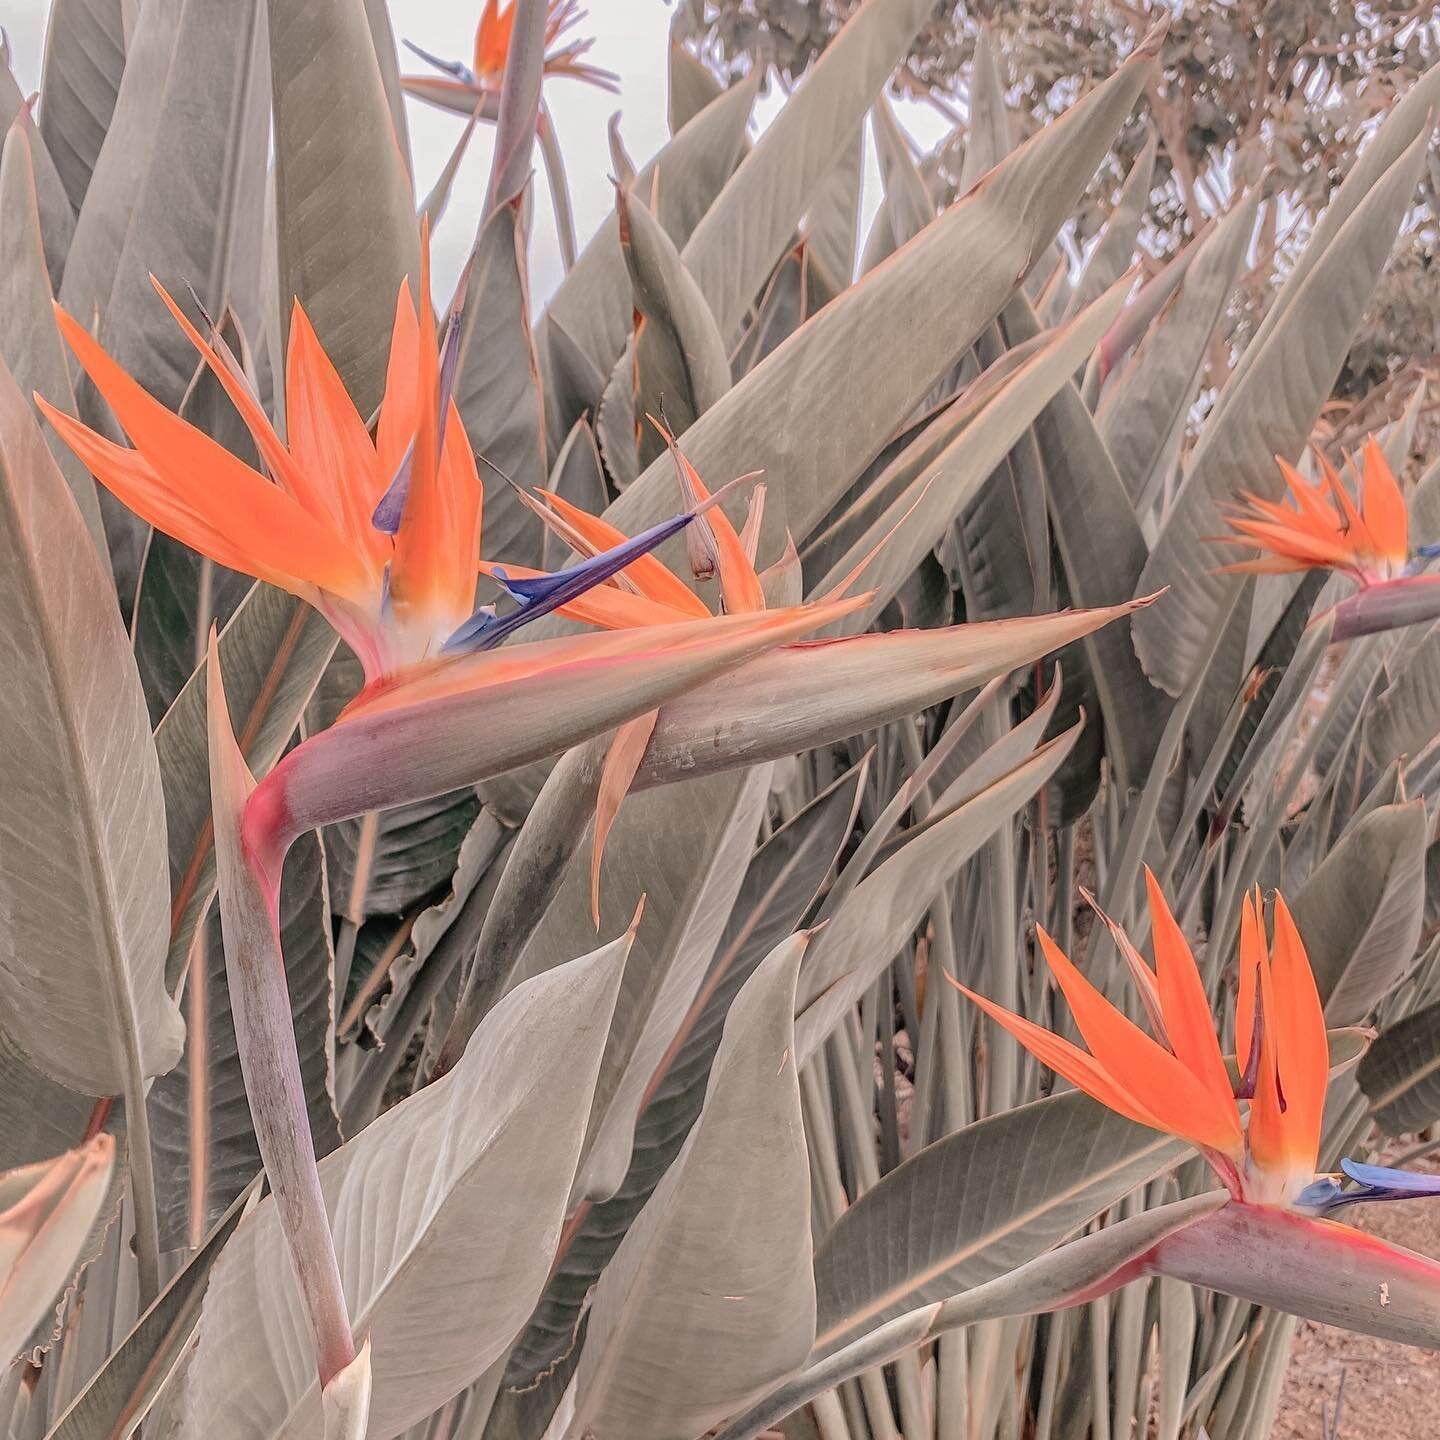 @lamag had an amazing article on October 15, 2015 with a question we really wanted to know! 
⠀⠀⠀⠀⠀⠀⠀⠀⠀
@nixols &ldquo;When Did the Bird of Paradise Become the Official Flower of L.A.? To celebrate the city&rsquo;s 171st birthday in 1952, Mayor Fletch